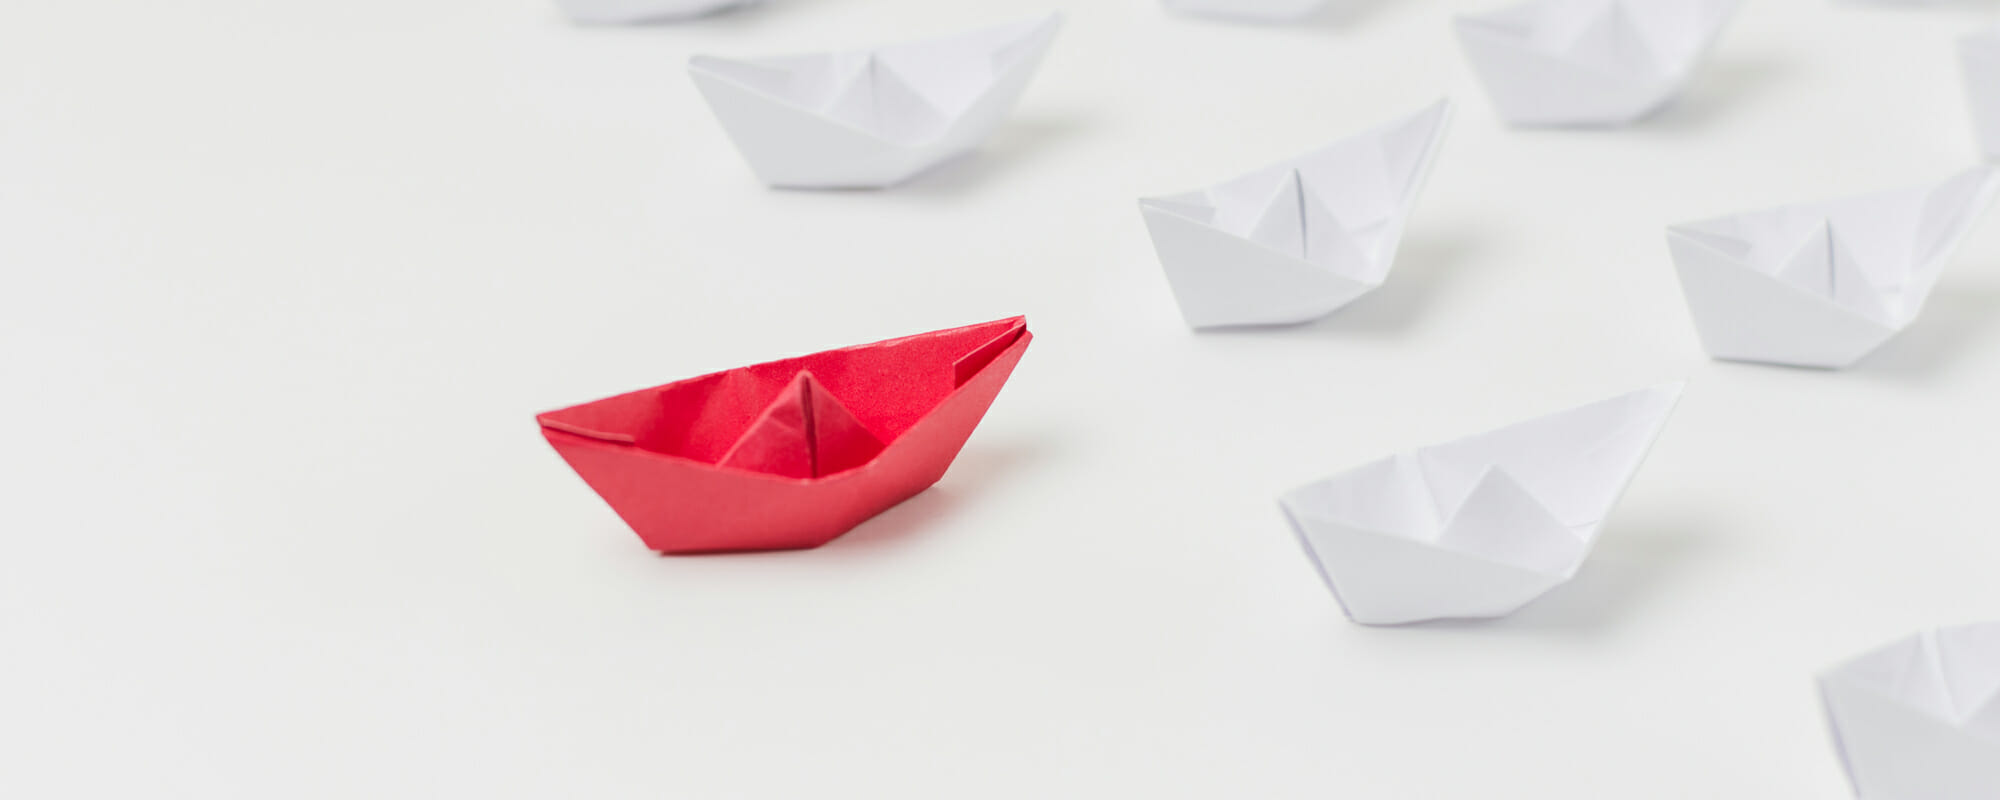 Red paper boat leading white paper boats